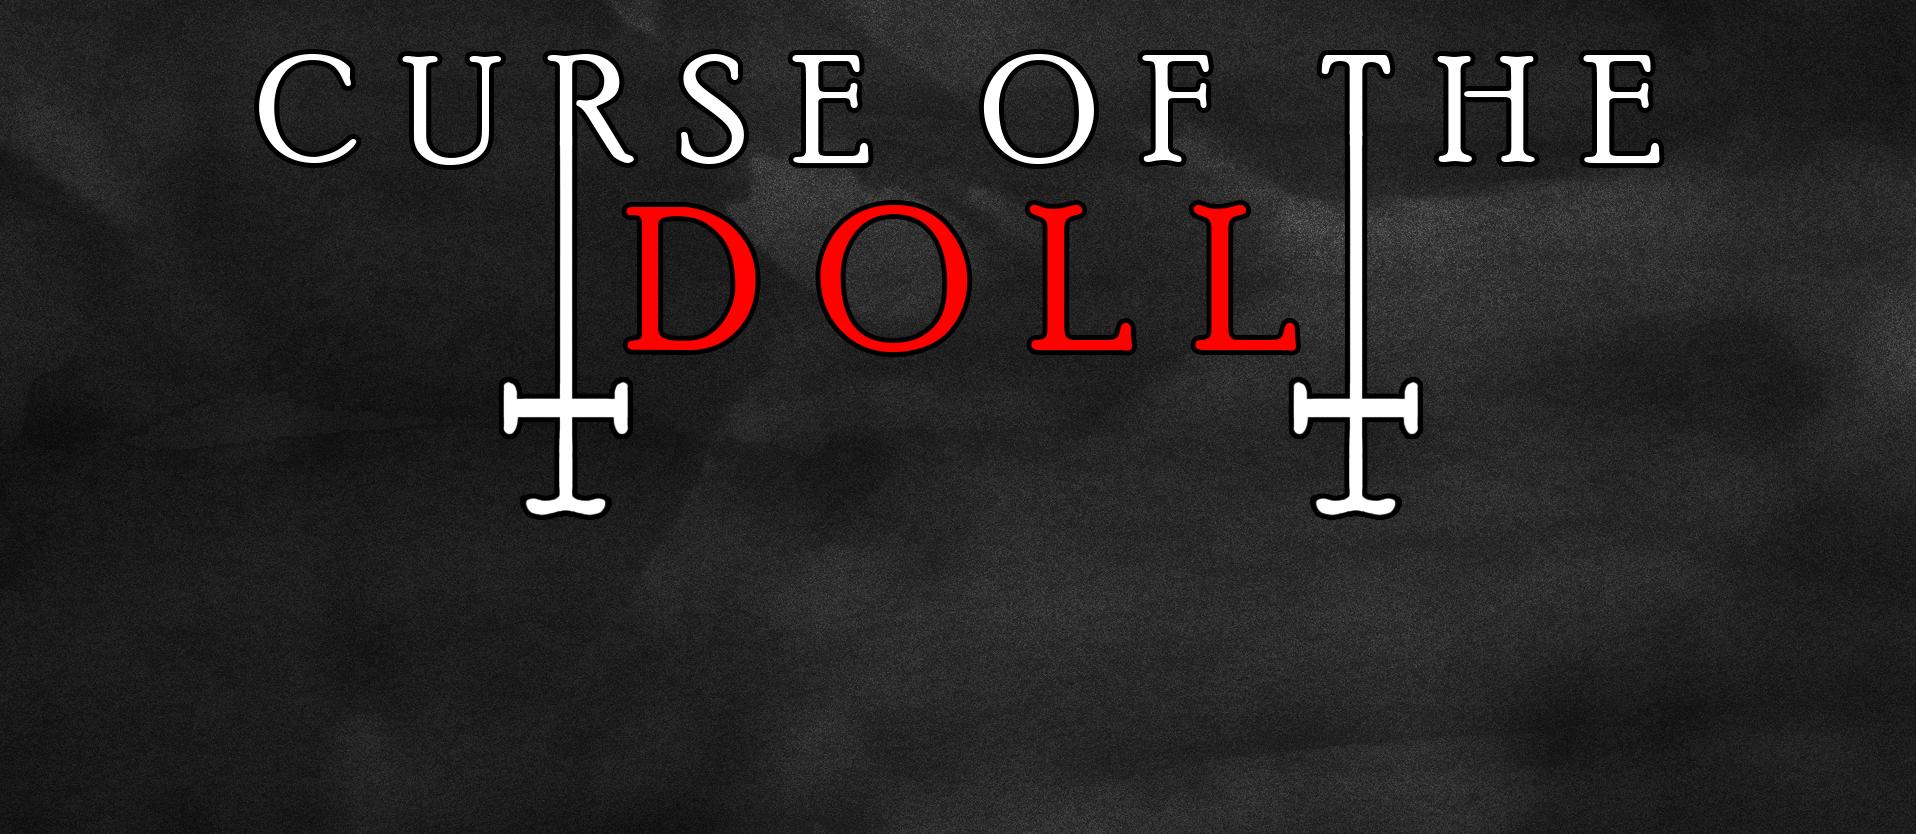 Curse of the Doll